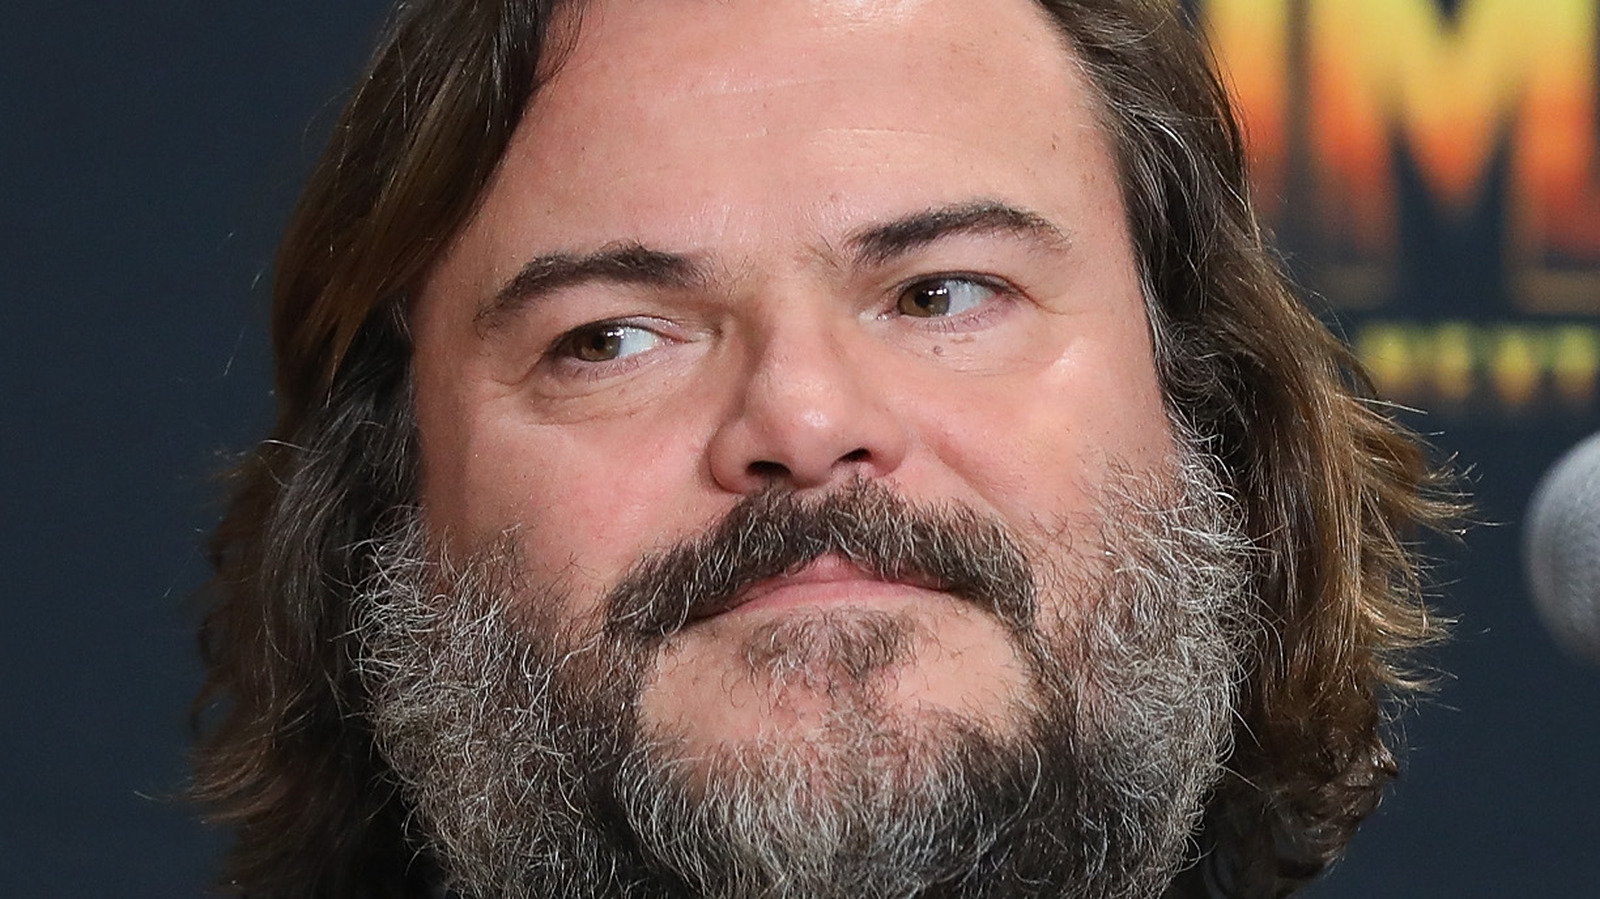 Actor Jack Black from the movie School of Rock is depicted on the News  Photo - Getty Images